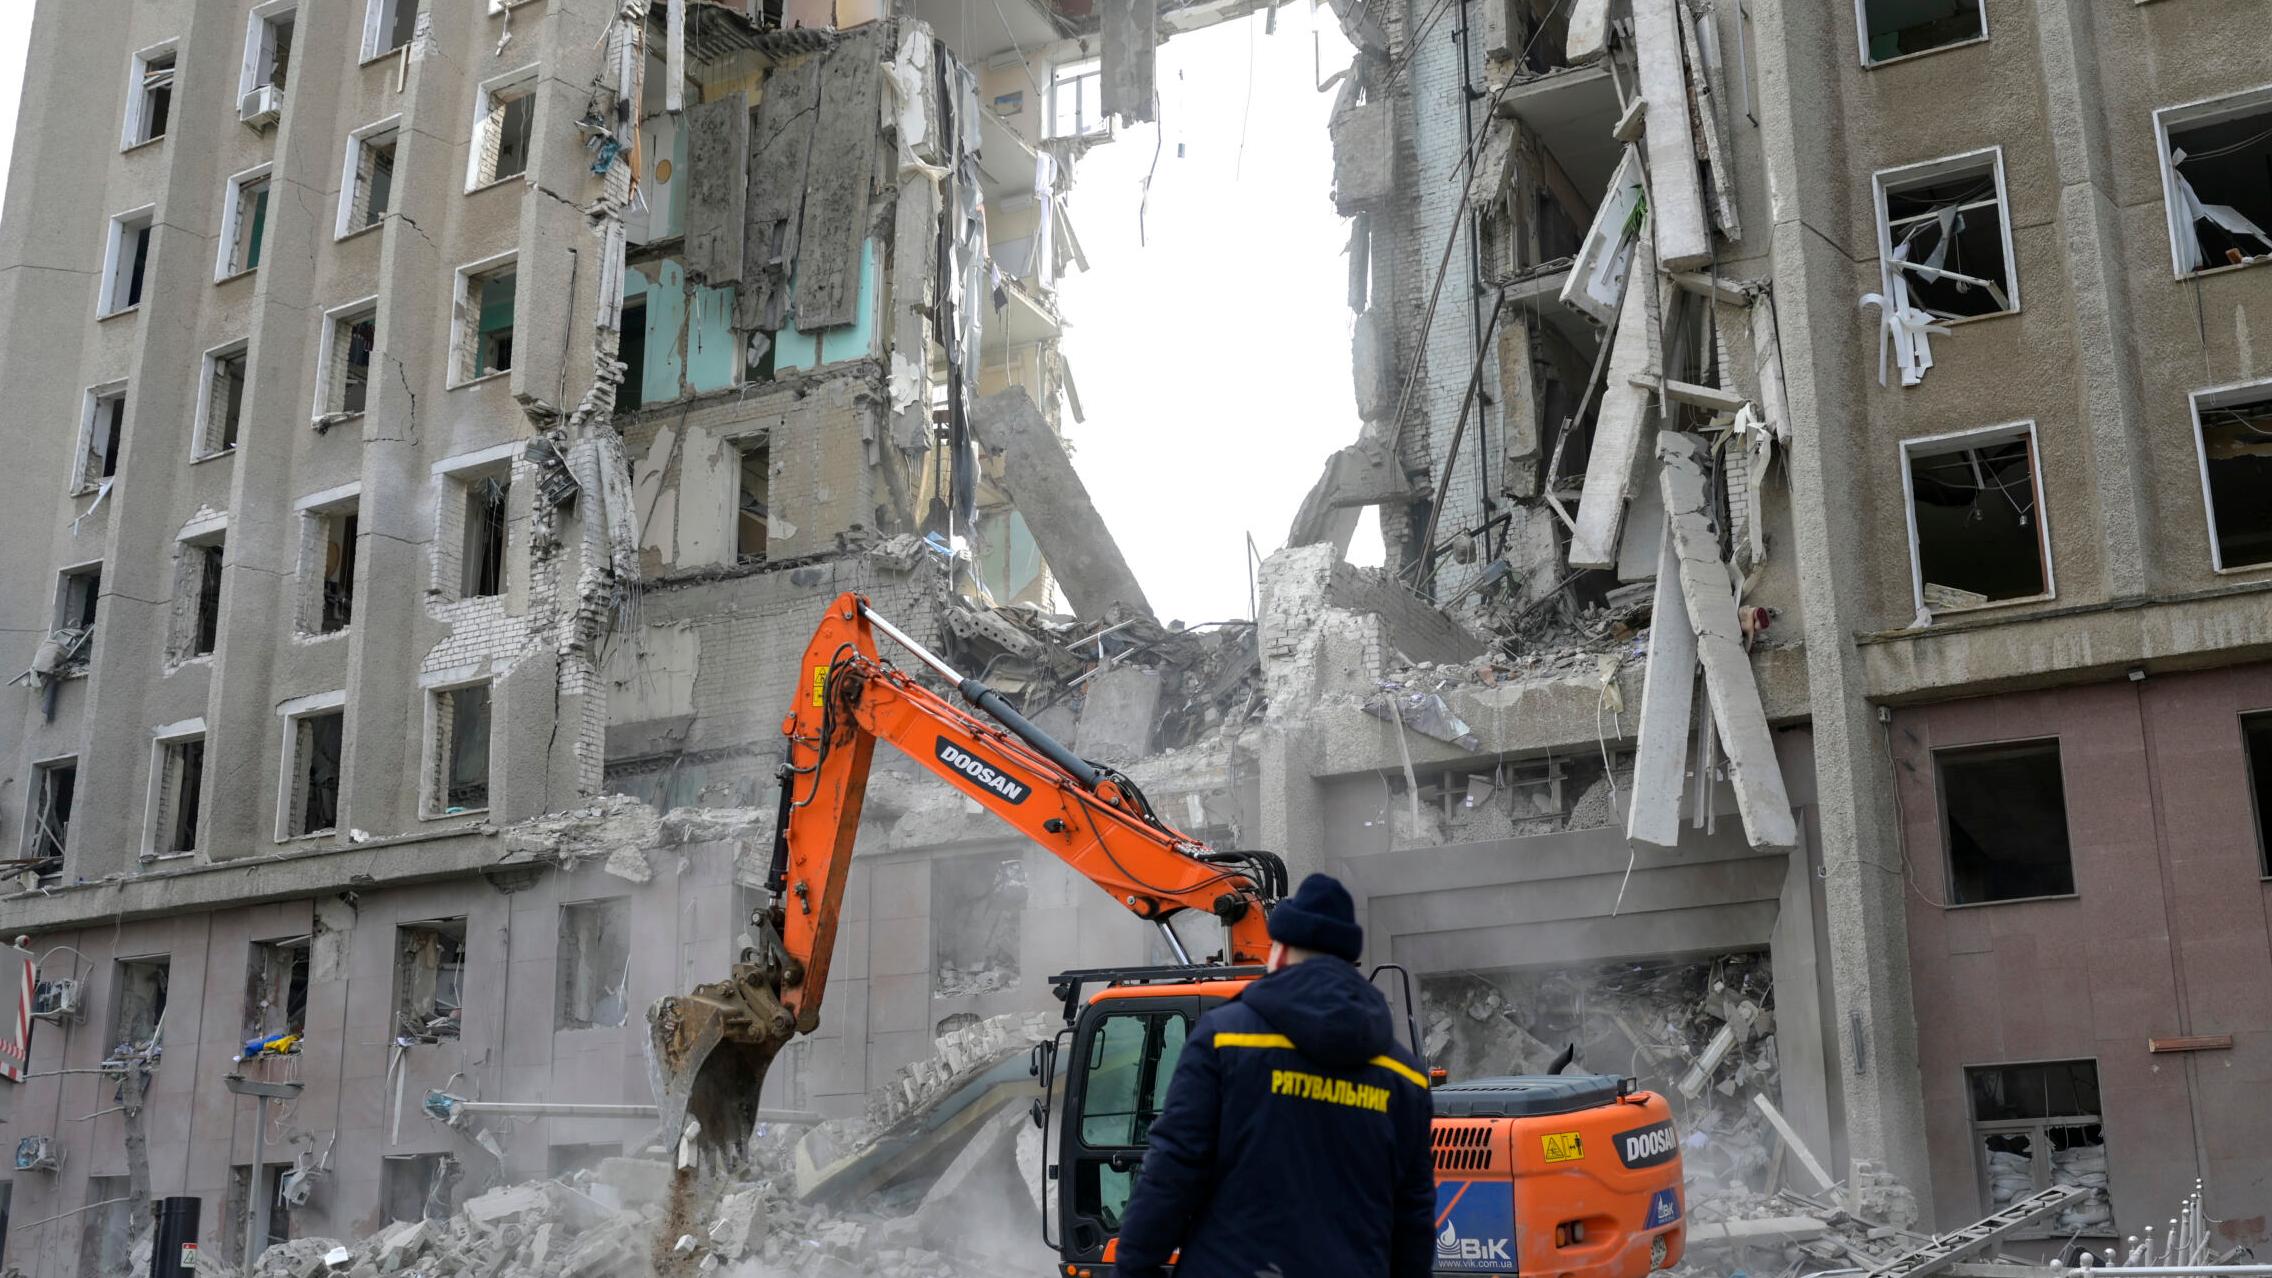 A worker watches an excavator clearing the rubble of a government building hit by Russian rockets in Mykolaiv on March 29, 2022. - A Russian strike battered the regional government building in the southern Ukrainian city of Mykolaiv, a key port under heavy assault for weeks, the regional governor said on March 29, 2022. Governor Vitaly Kim said that most people inside the building had not been injured but several civilians and soldiers were unaccounted for. (